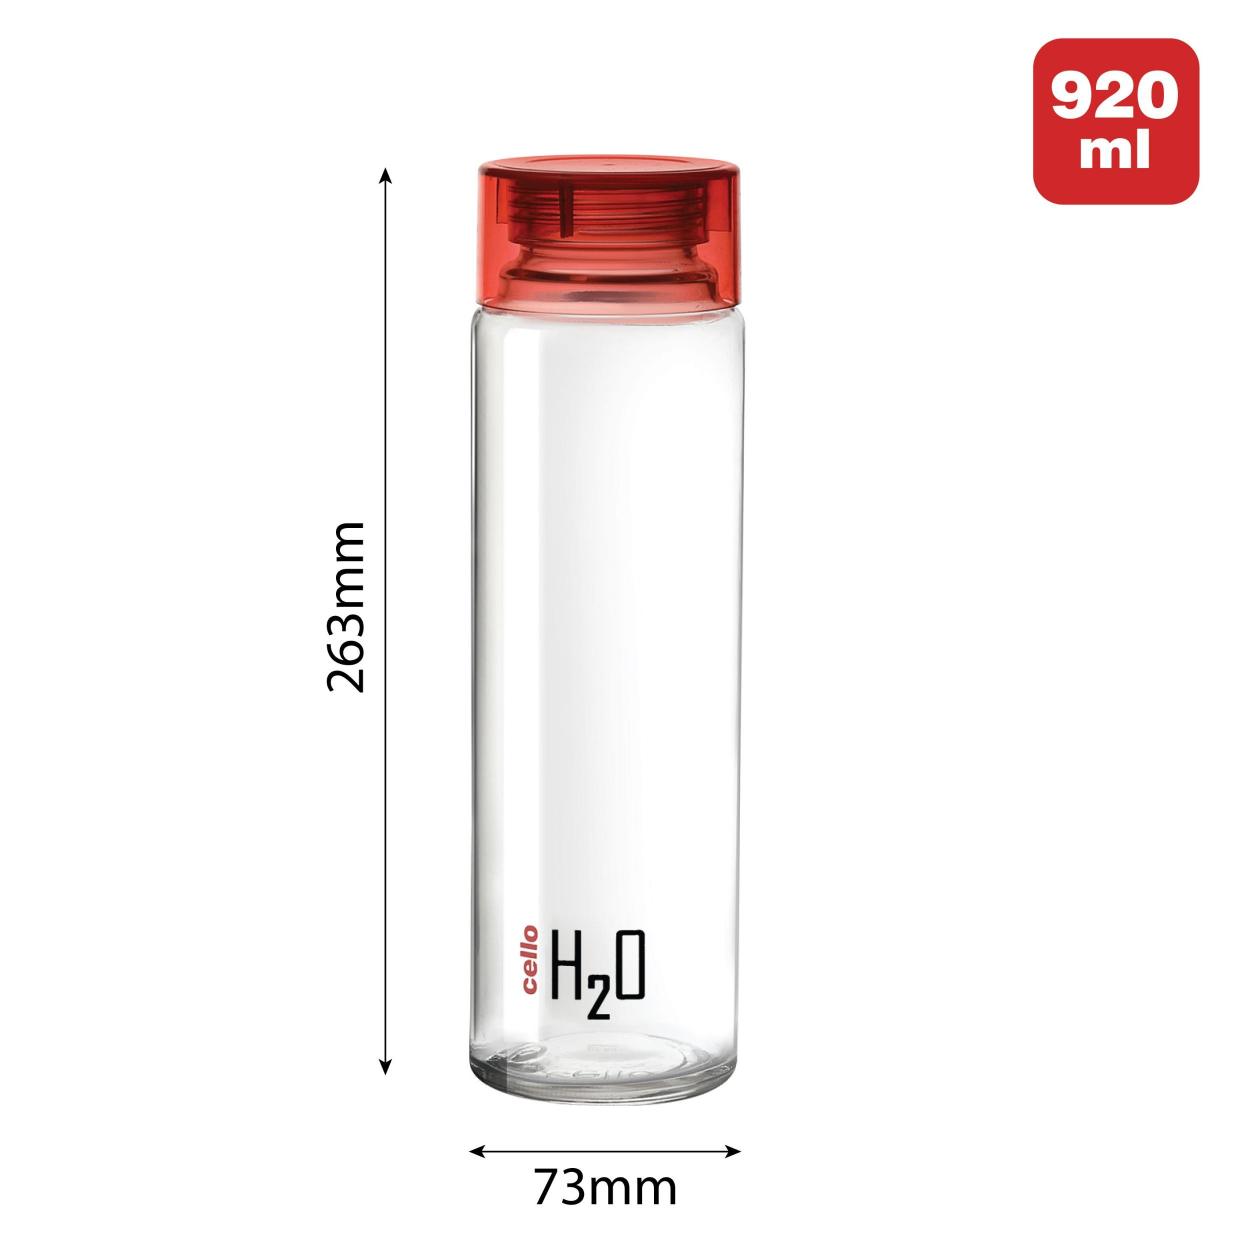 H2O Glass Water Bottle with Plastic Cap, 920ml Red / 920ml / 1 Piece